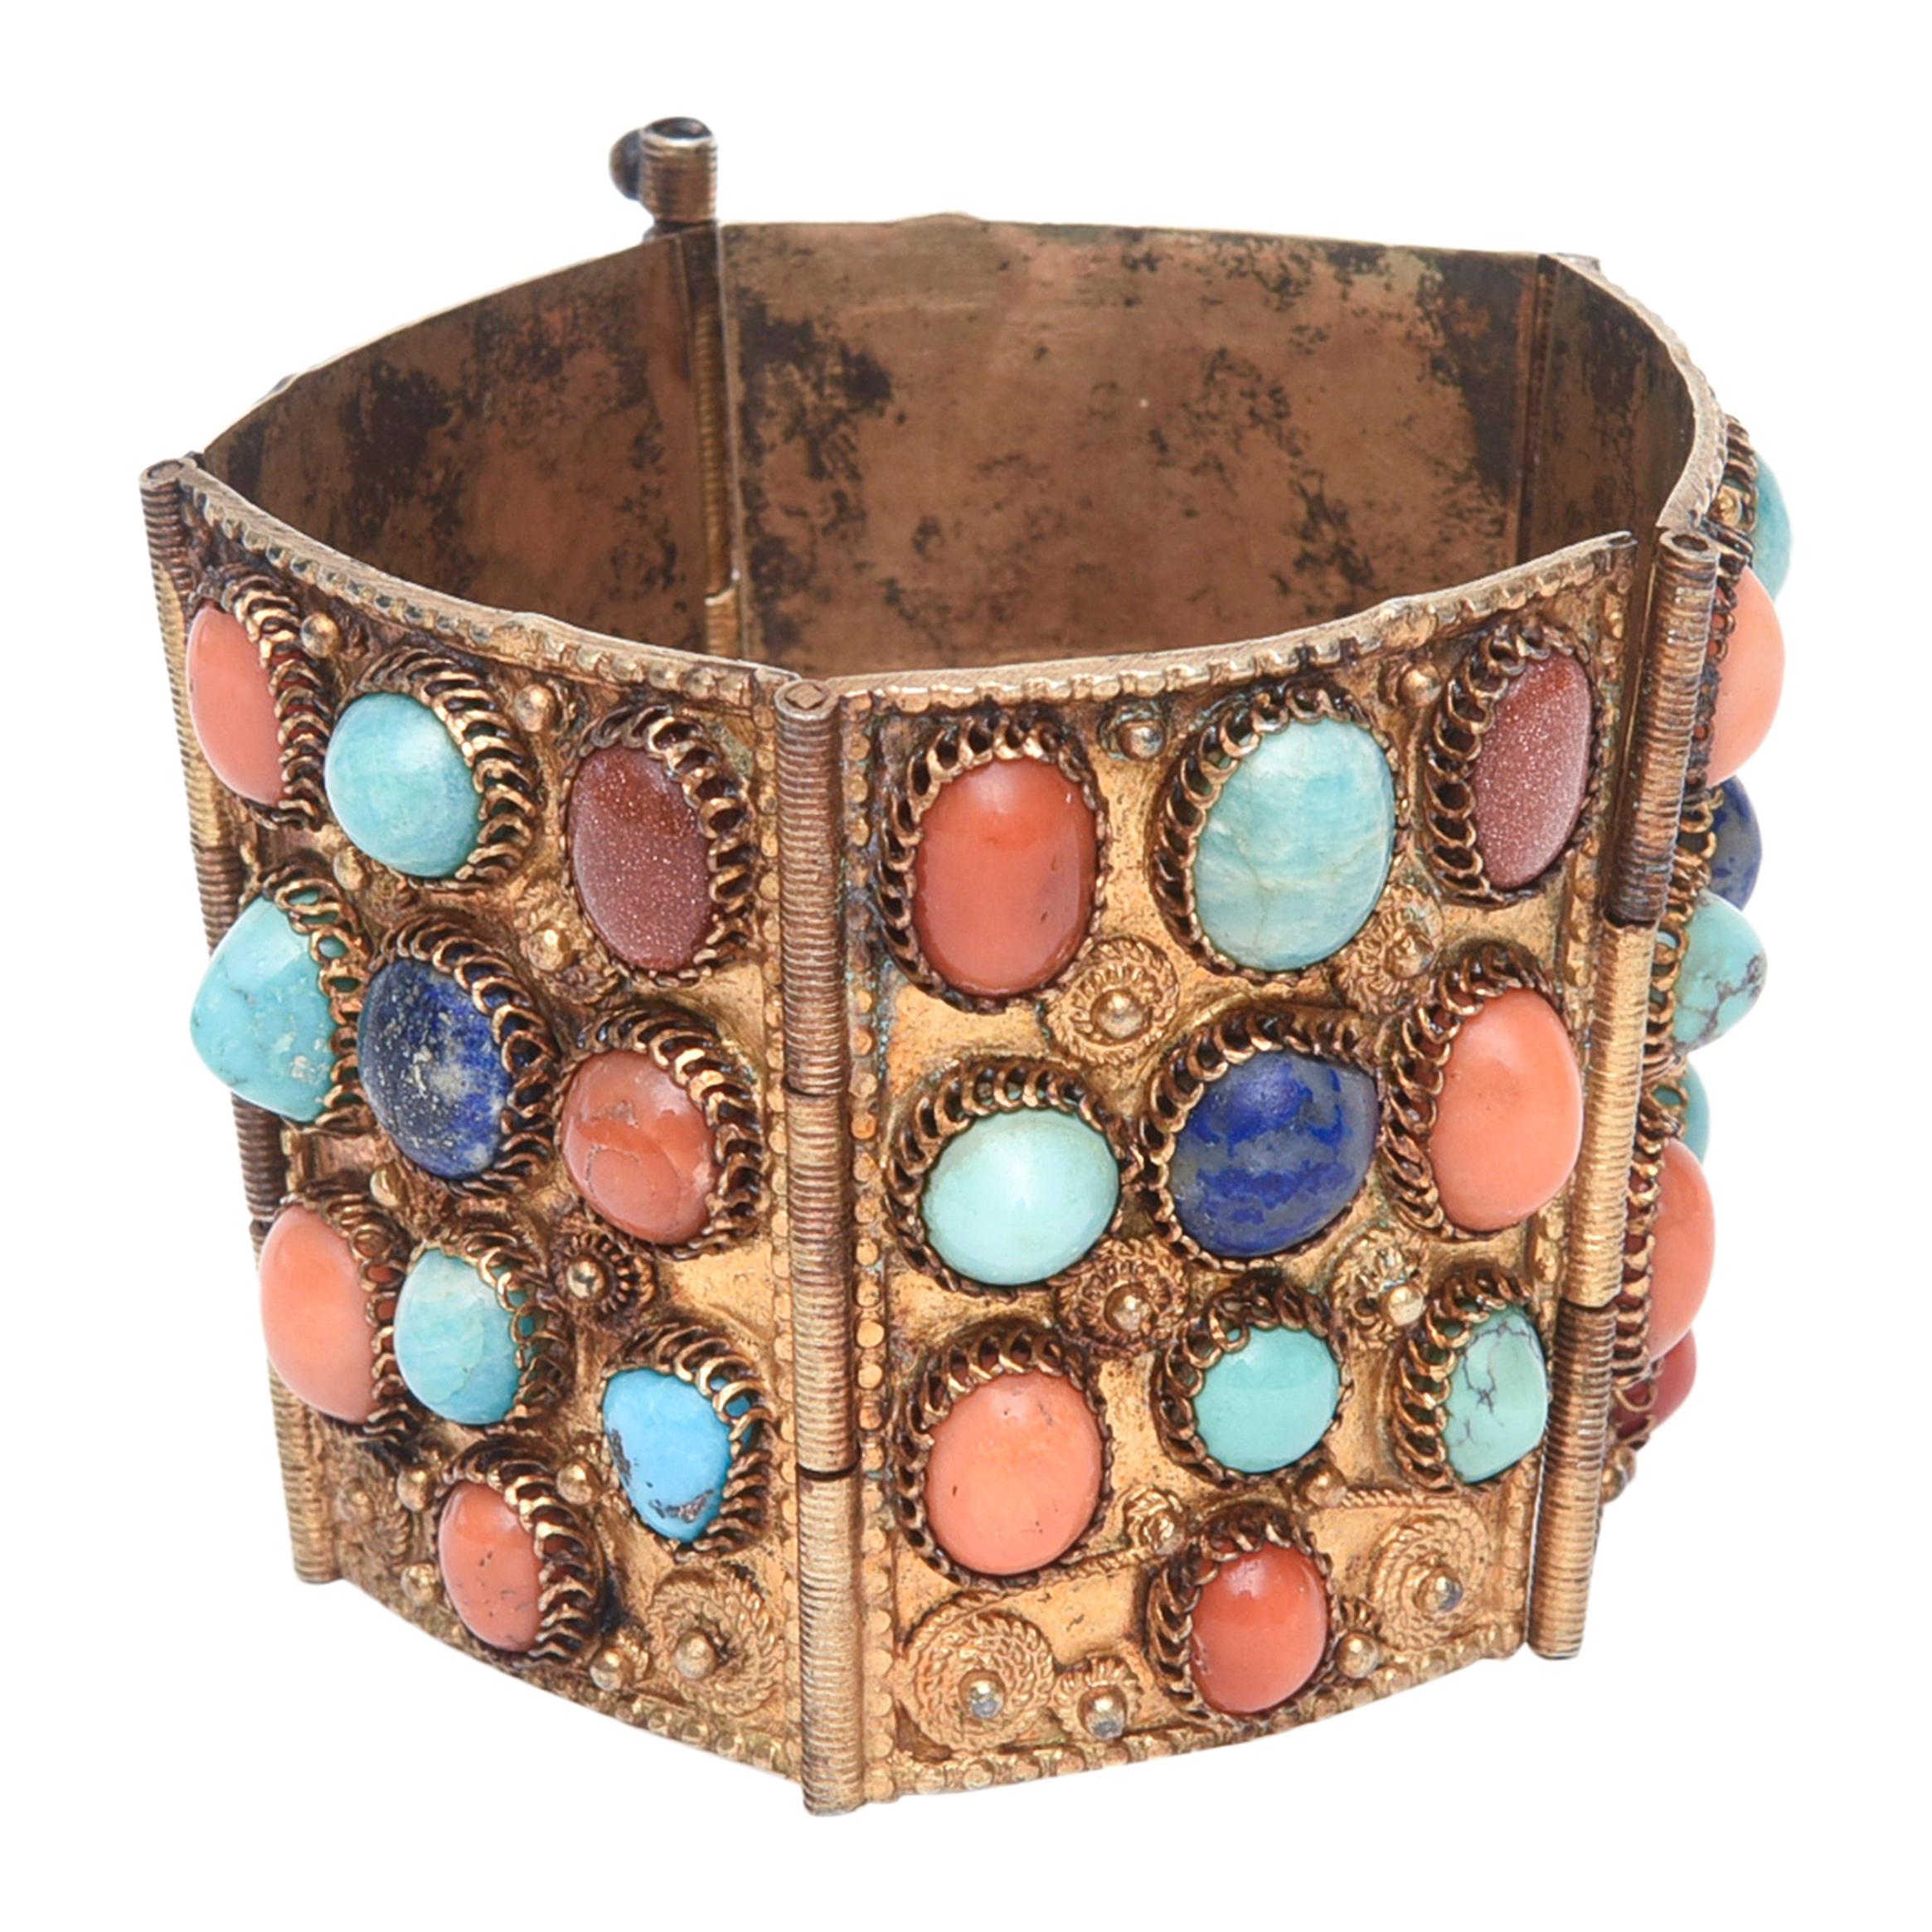  Egyptian Revival Coral, Turquoise and Lapis Vermeil Cuff Bracelet 